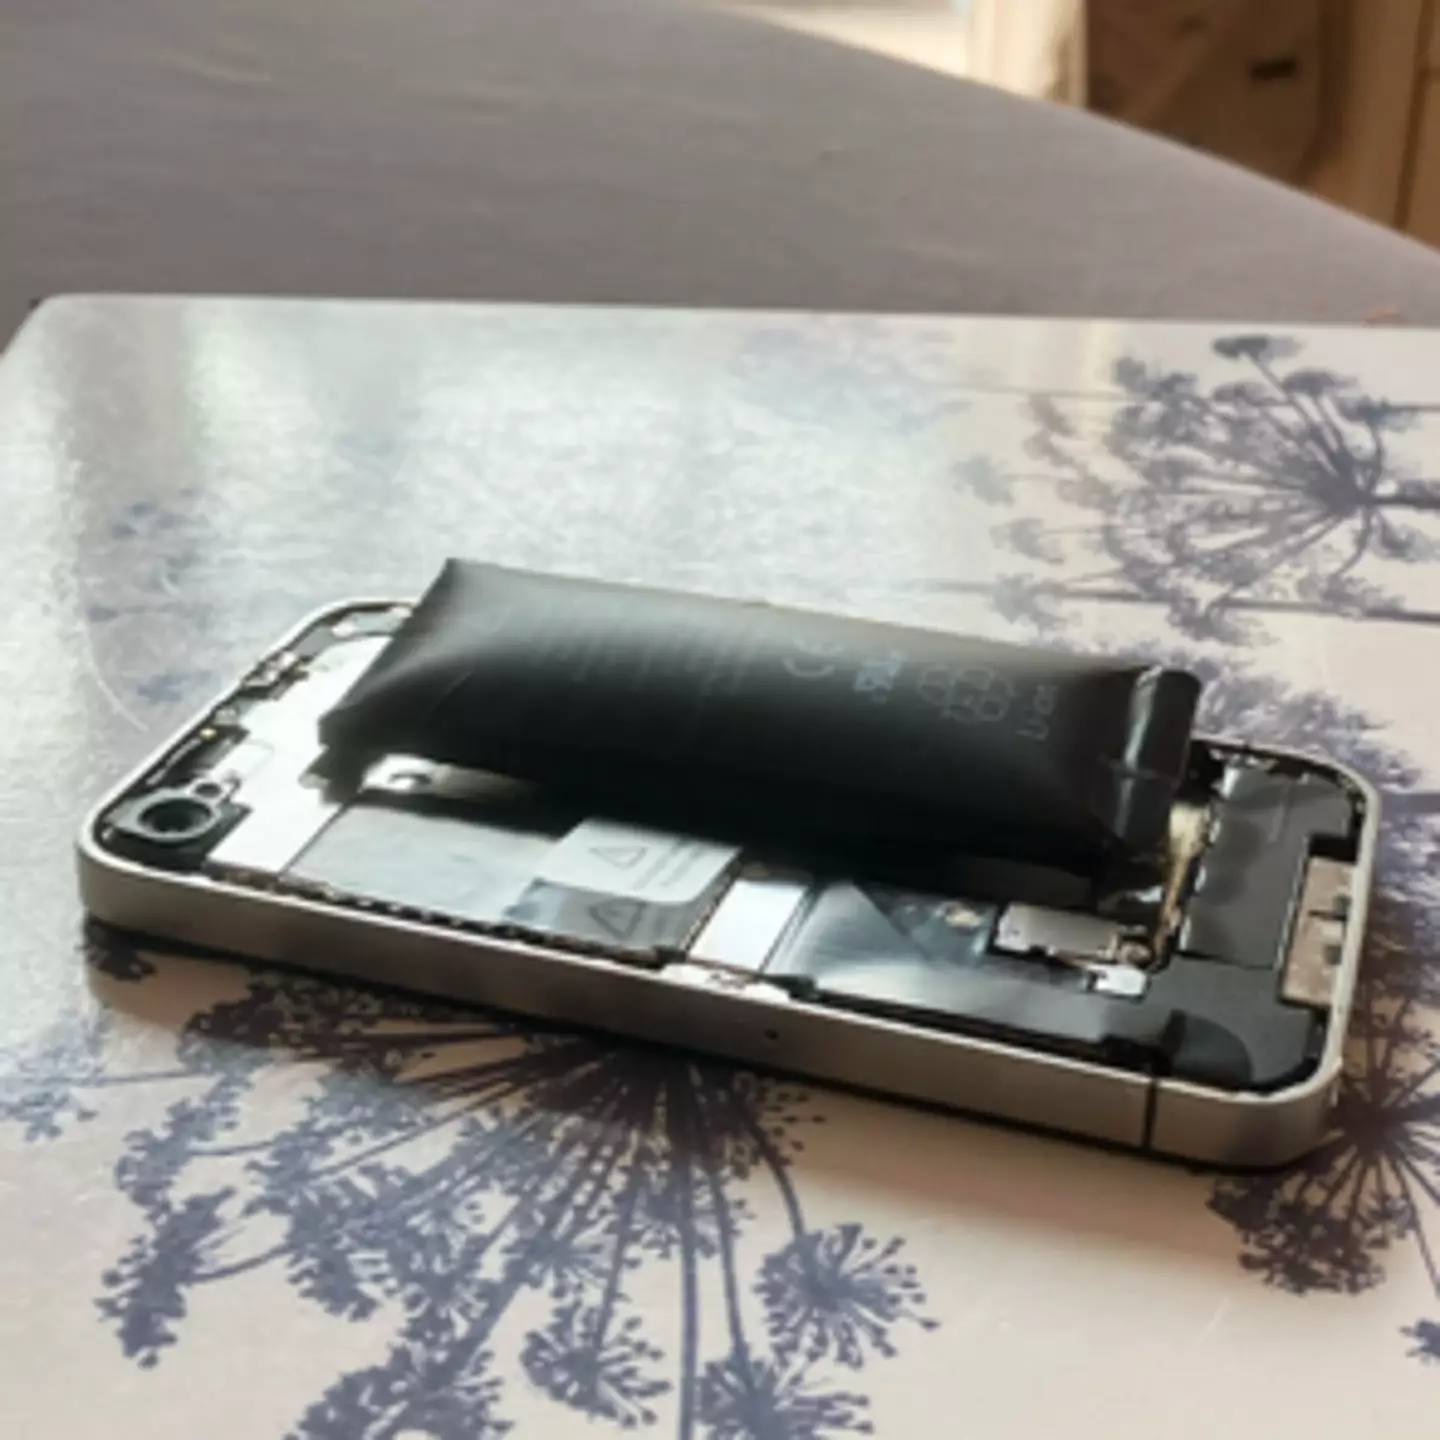 iPhone user warns Apple fans after finding old device with largely swollen battery